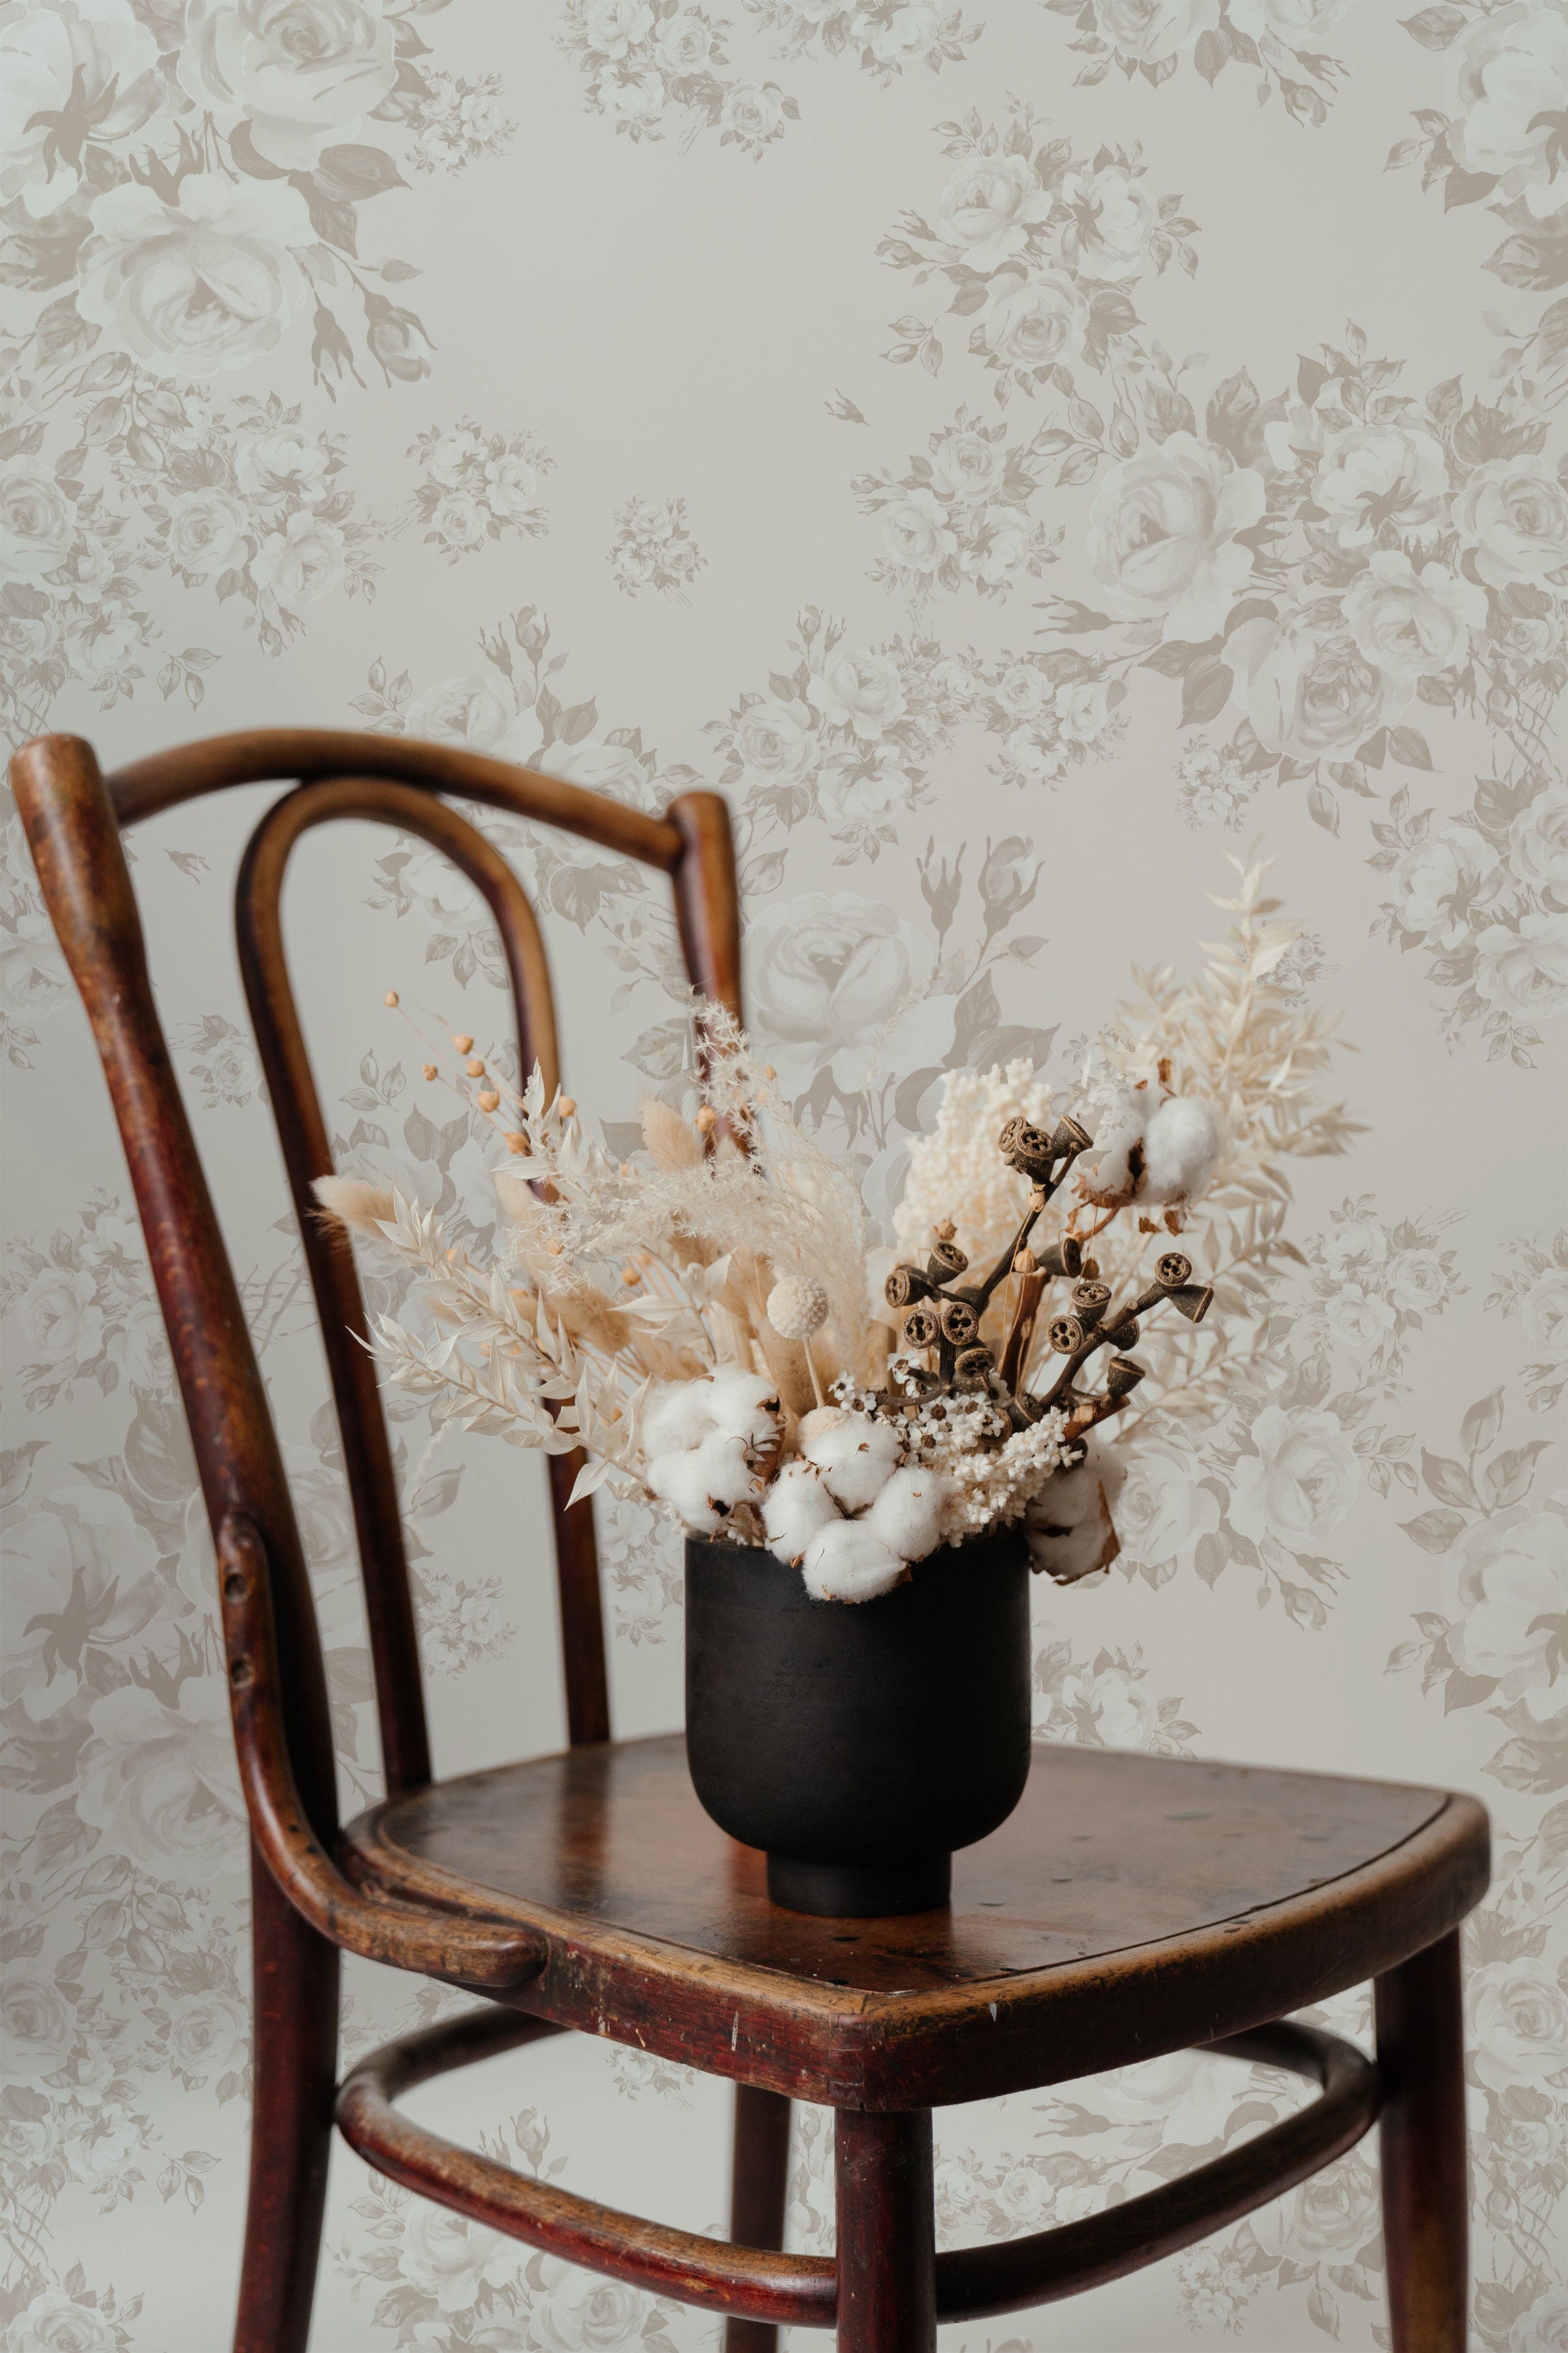 An aged wooden chair set against a wall covered in 'Rose Bouquet Wallpaper,' which showcases a detailed pattern of roses and foliage in muted grey on a light background. Atop the chair is a black vase filled with a mix of dried flowers and cotton branches, complementing the vintage aesthetic of the setting.